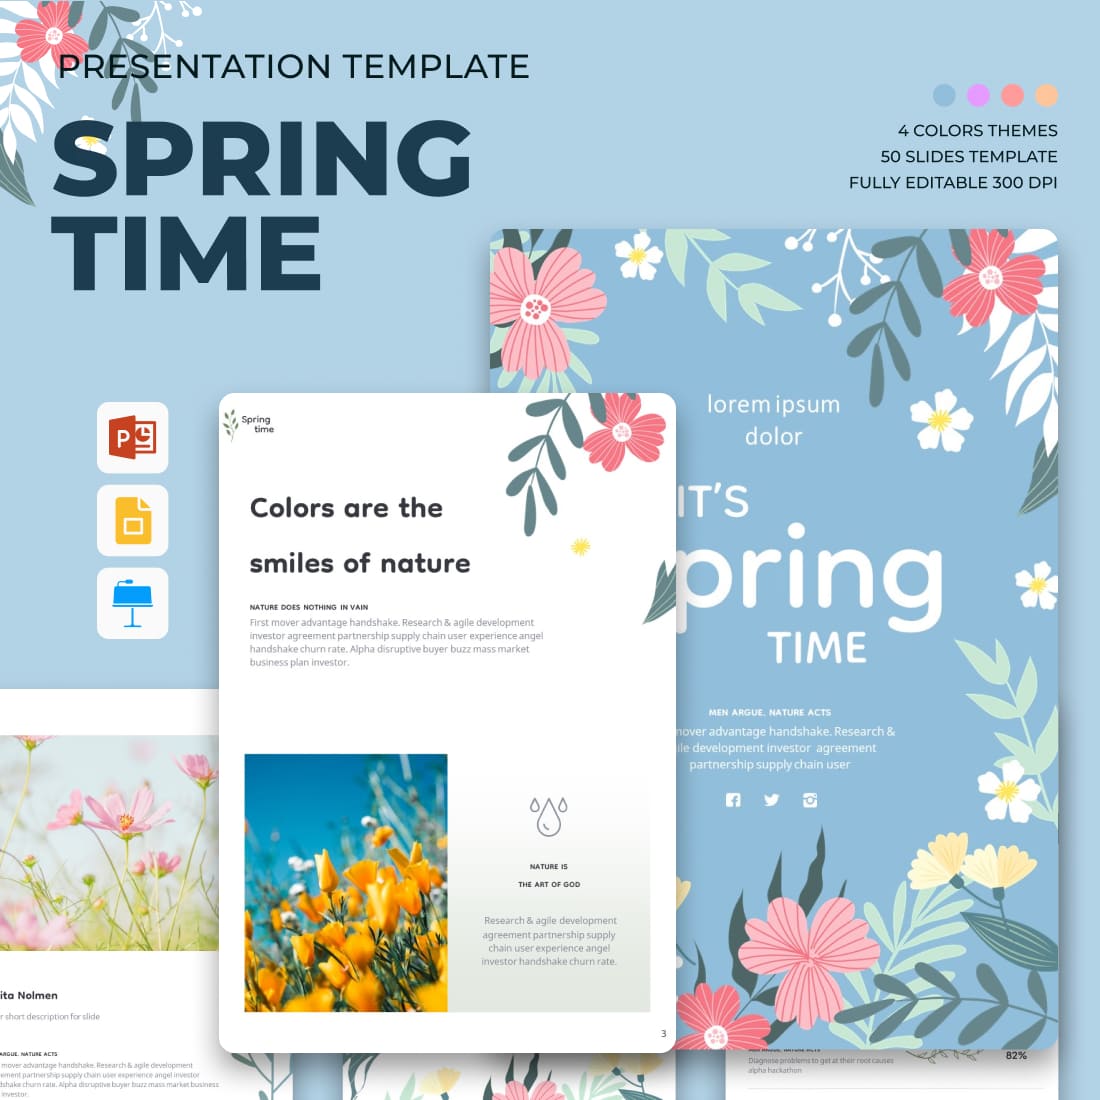 Bundle of images of irresistible presentation slides on the theme of spring.